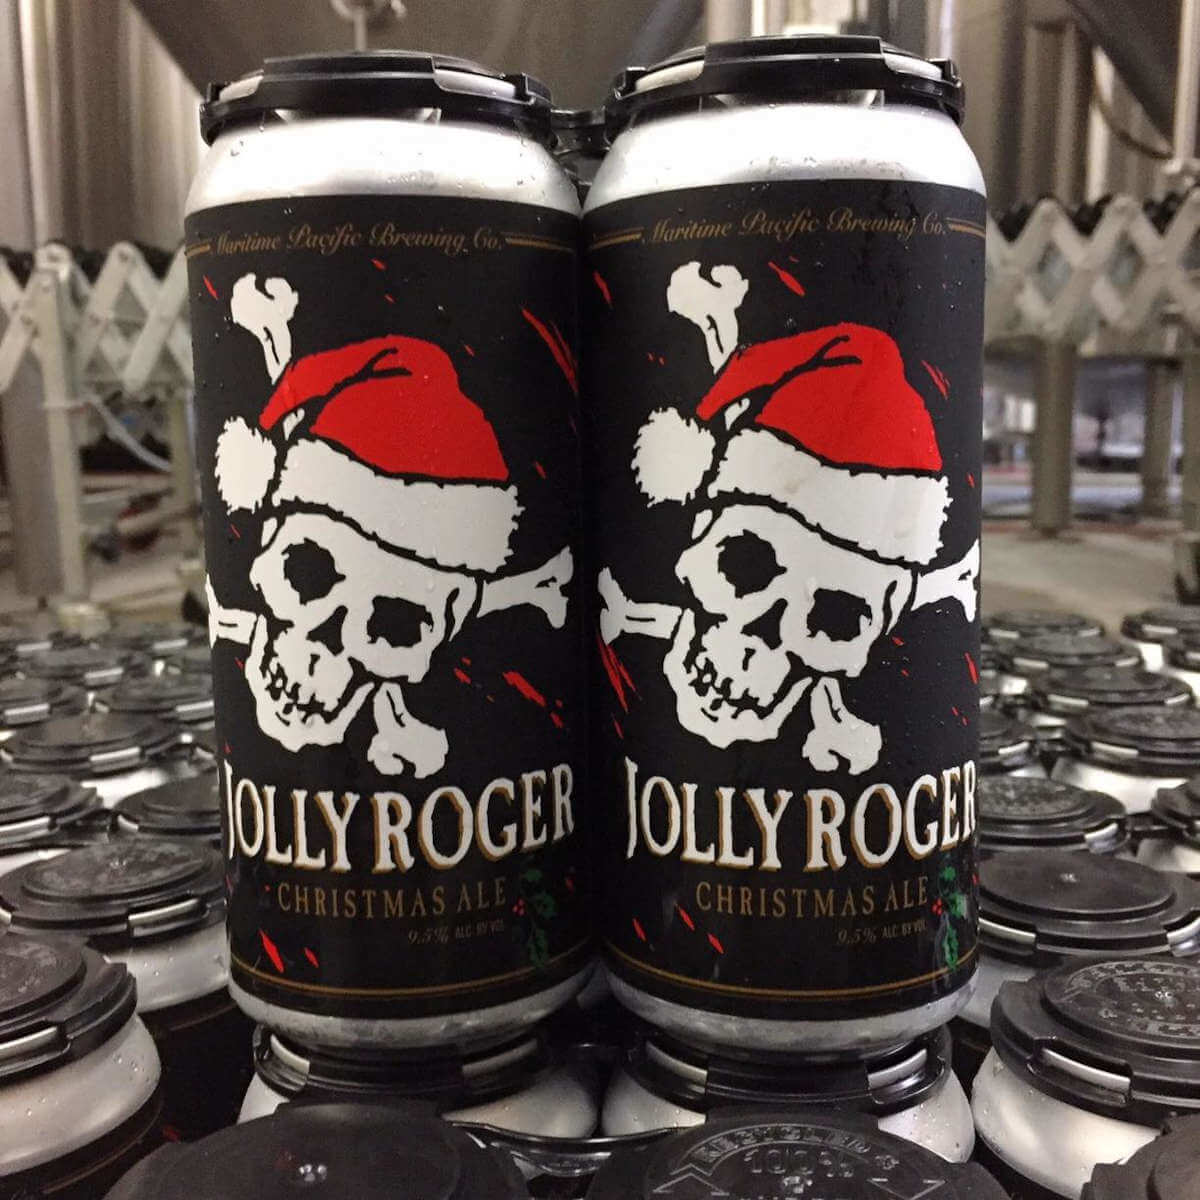 Advent Beer Calendar 2020: Day 9: Maritime Pacific Brewing Jolly Roger Christmas Ale